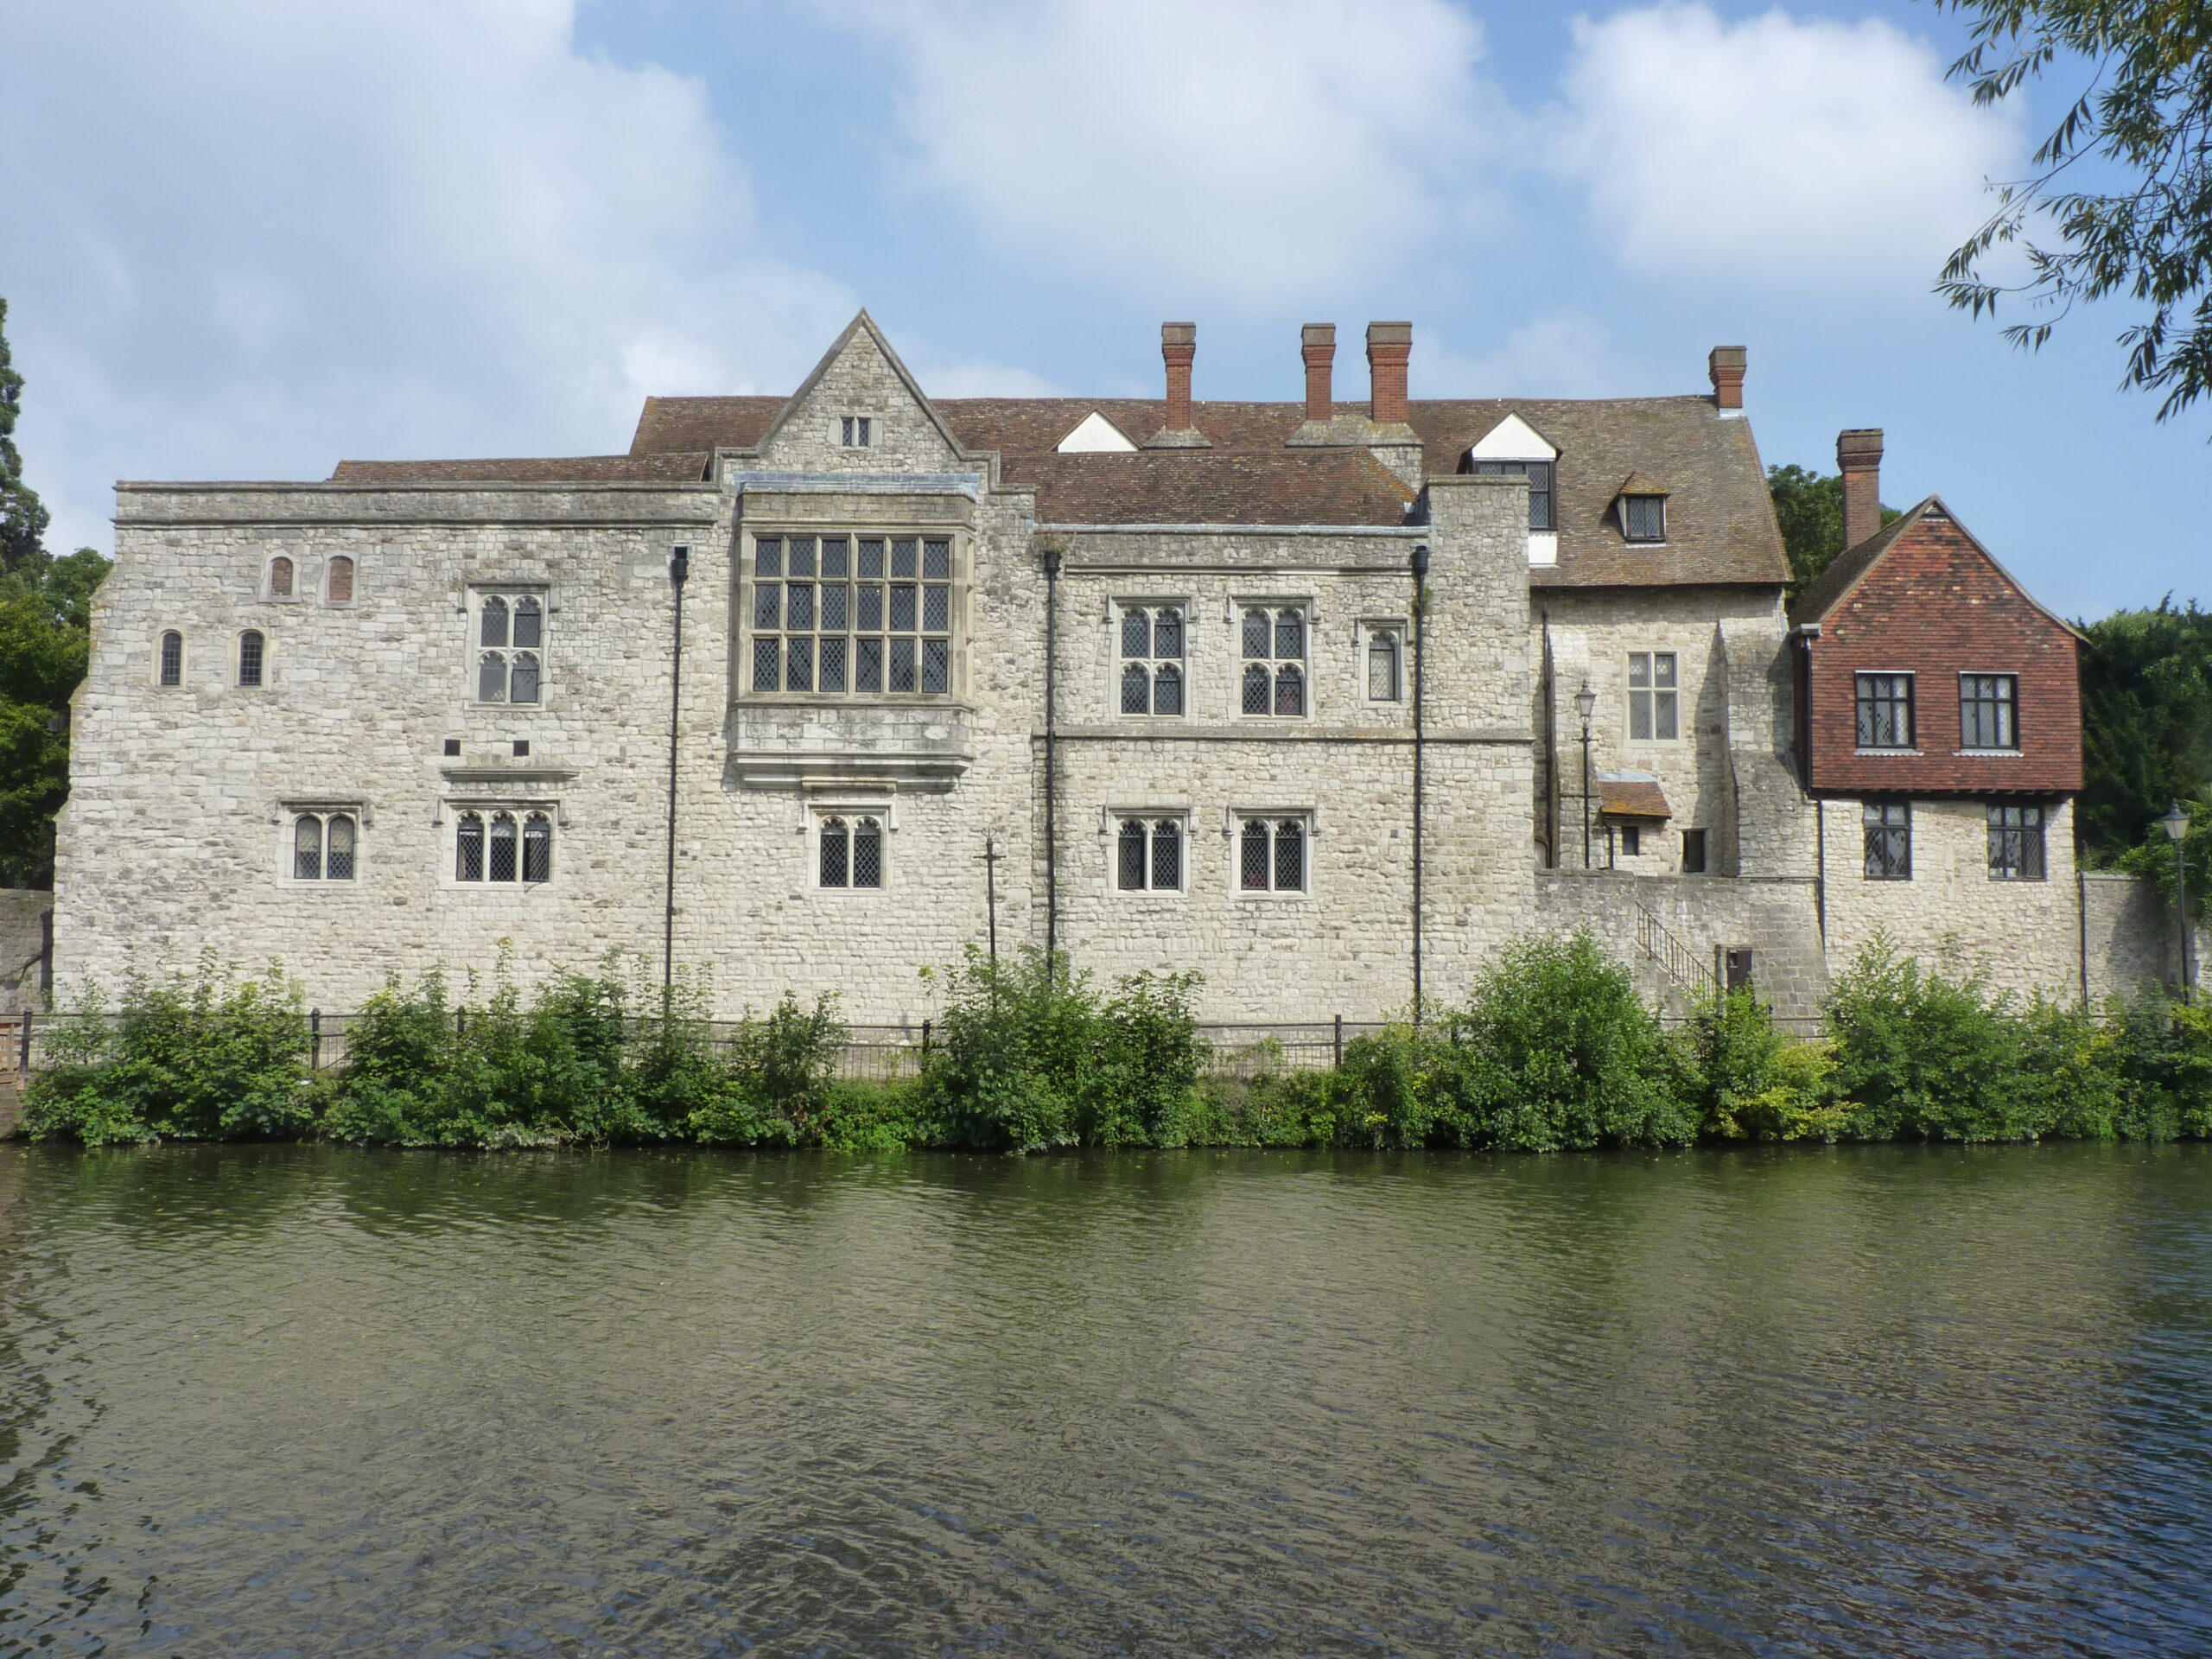 The Archbishops Palace in Maidstone building with water in front.